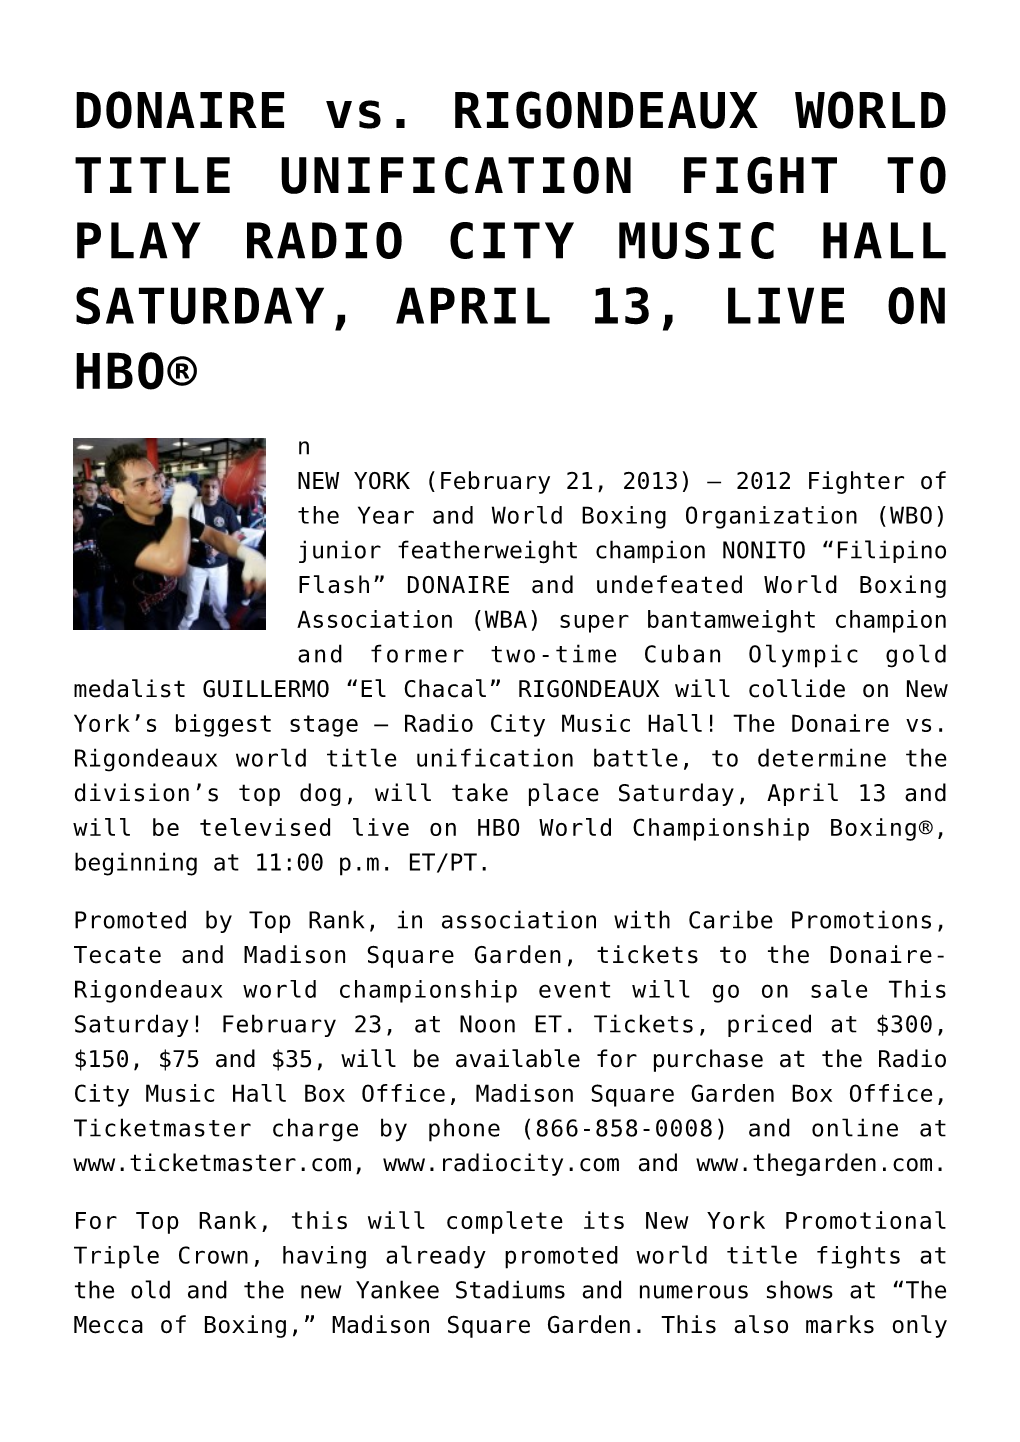 DONAIRE Vs. RIGONDEAUX WORLD TITLE UNIFICATION FIGHT to PLAY RADIO CITY MUSIC HALL SATURDAY, APRIL 13, LIVE on HBO®